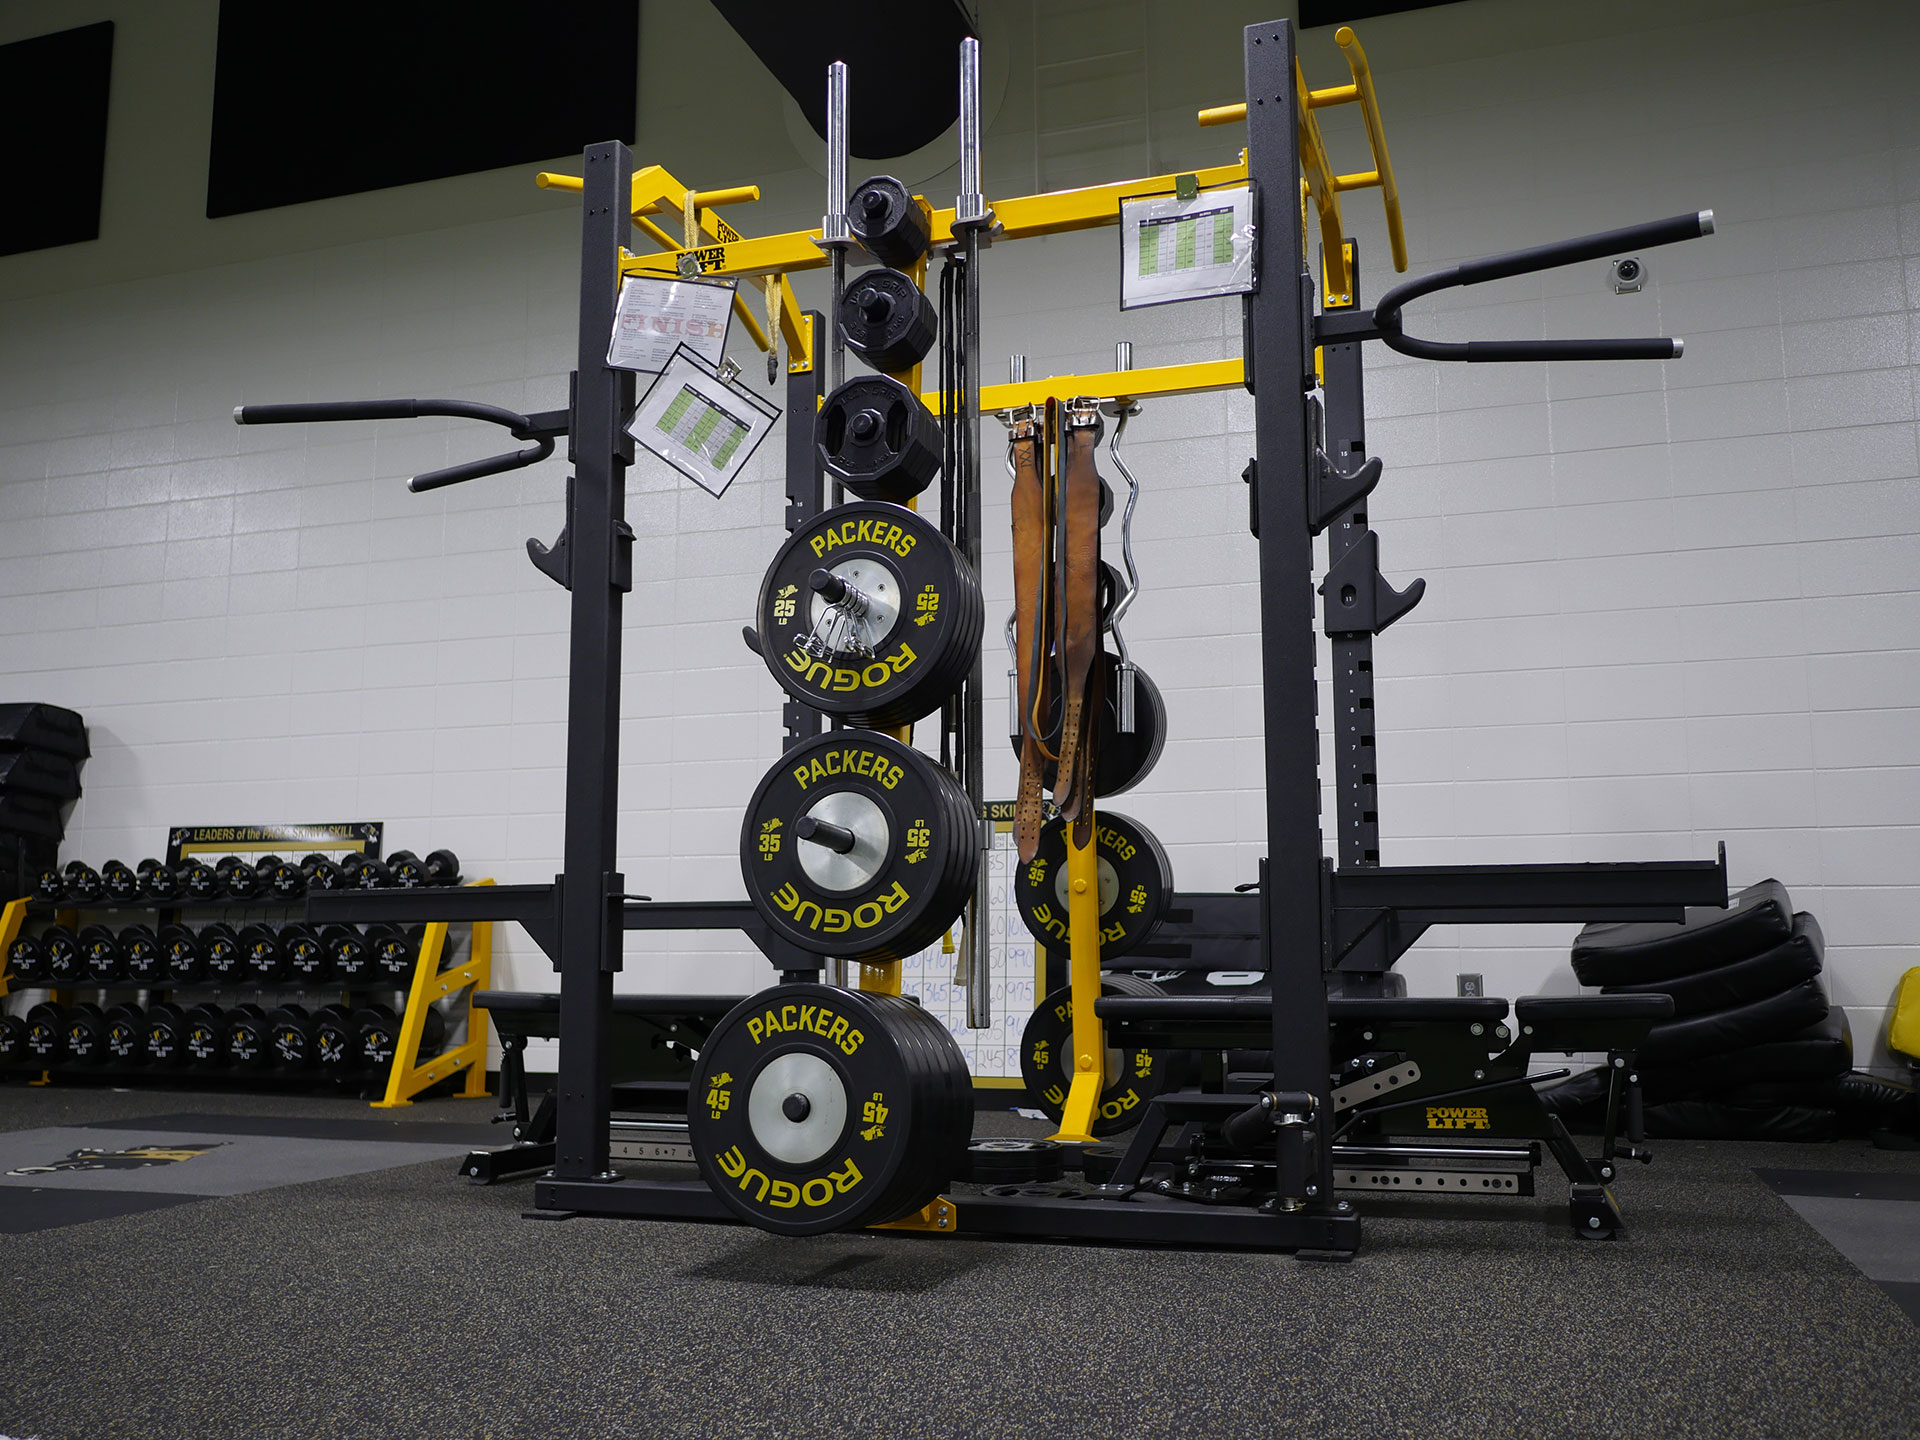 colquitt-county-packers-weight-training-facility-